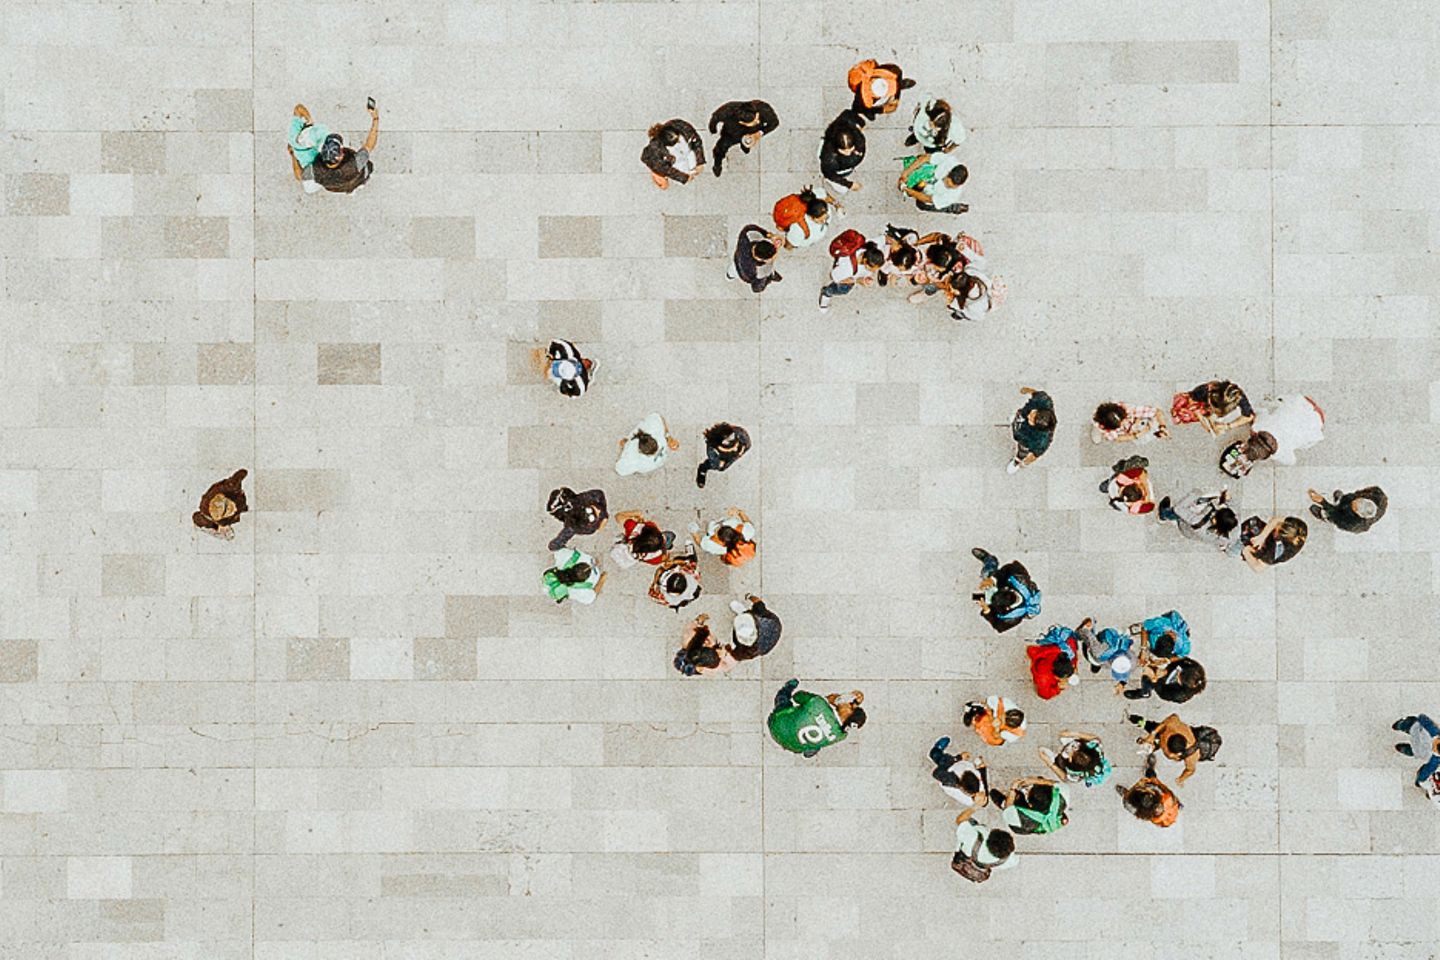 Group of people from a bird's eye view